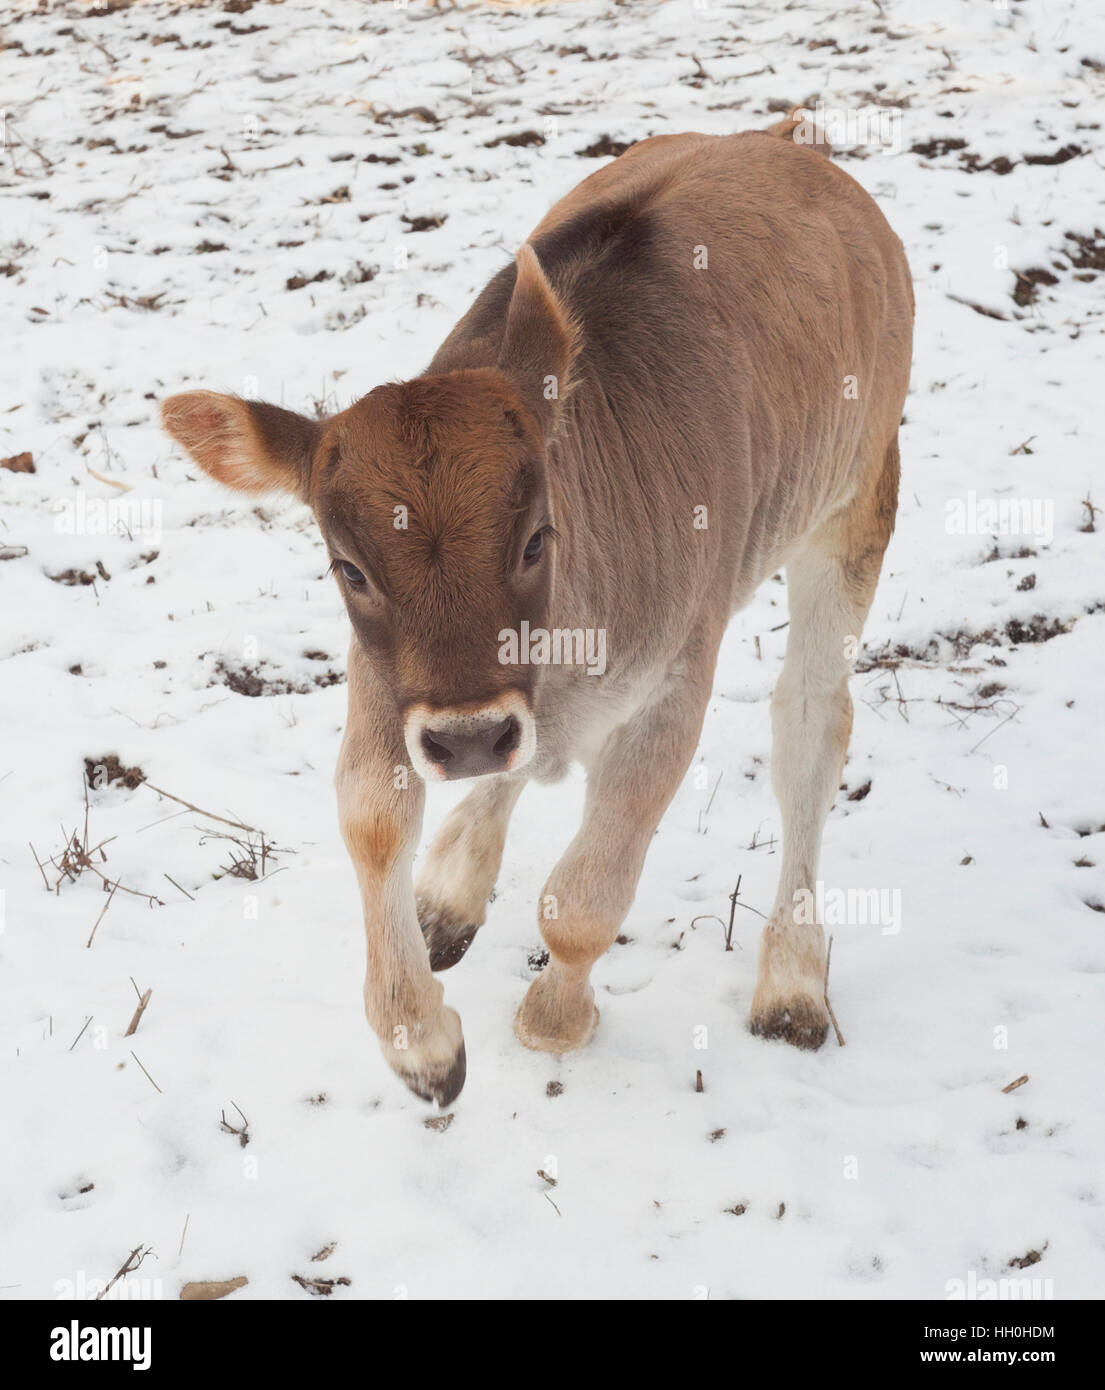 calf playing in snow Stock Photo